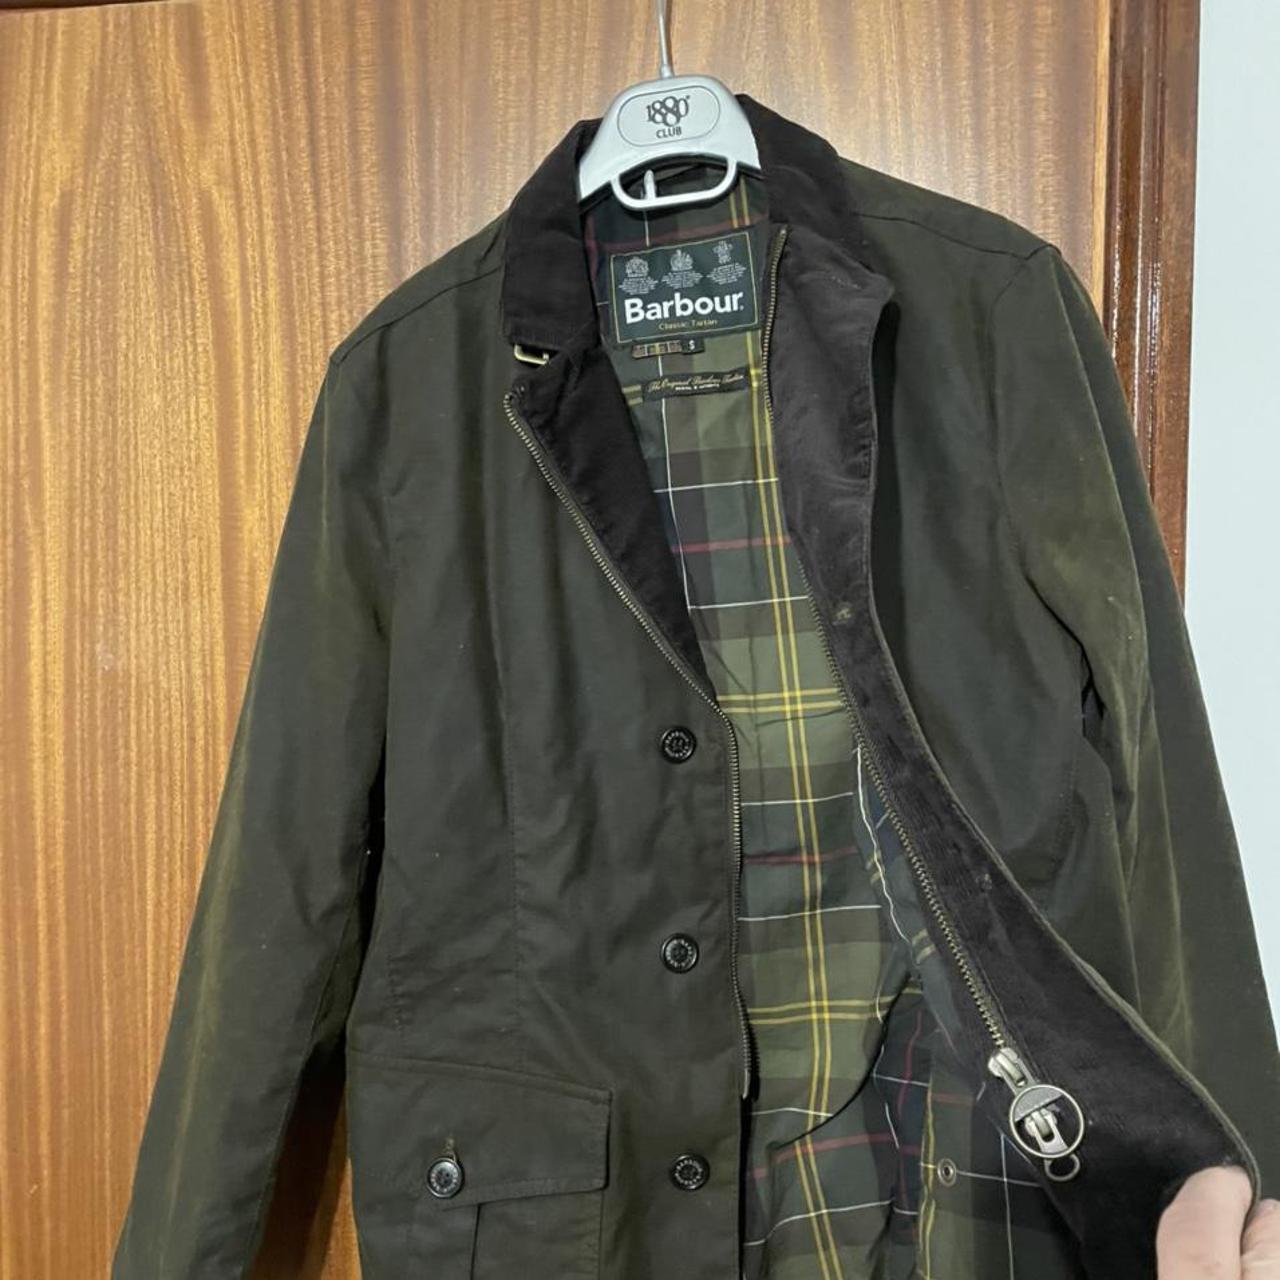 Mens Barbour wax jacket Size small Rarely worn as... - Depop